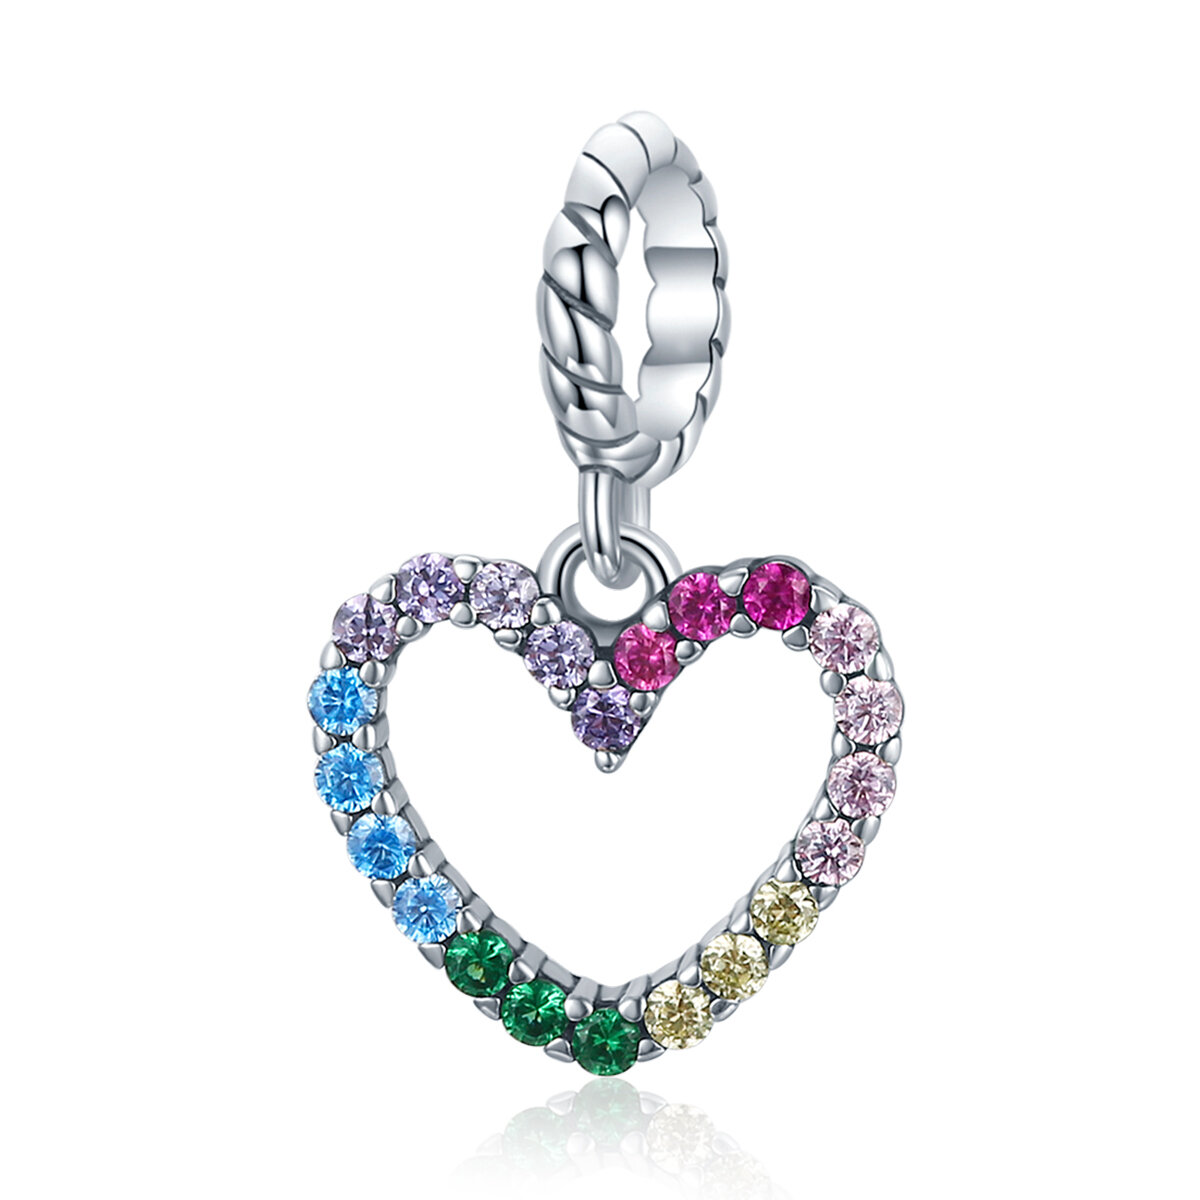 GemKing SCC1851 Rainbow love S925 Sterling Silver Charm